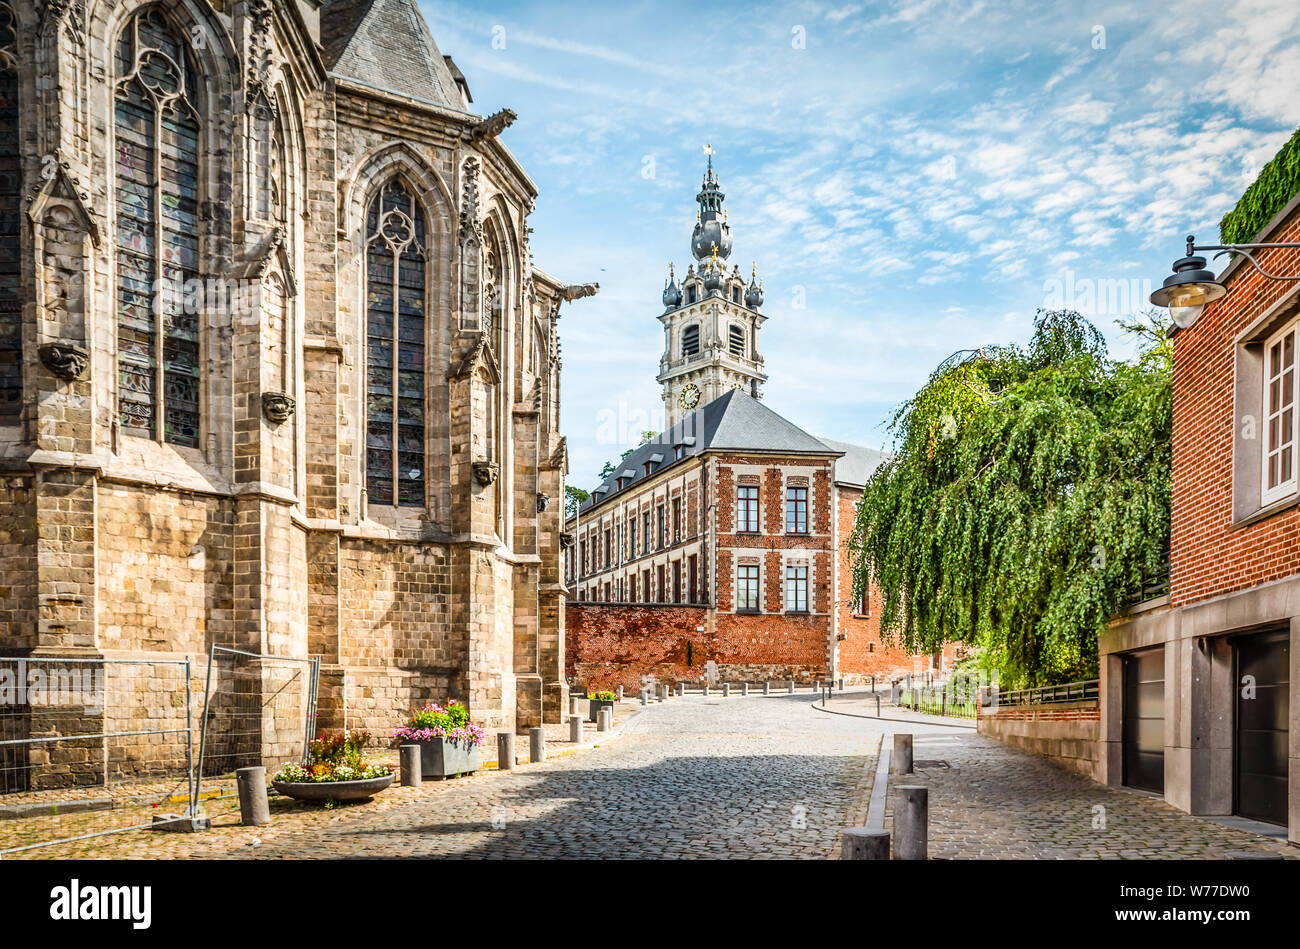 Cobbled street with church and belfry tower in Walloon city center of Mons, Hainaut, Belgium. Stock Photo